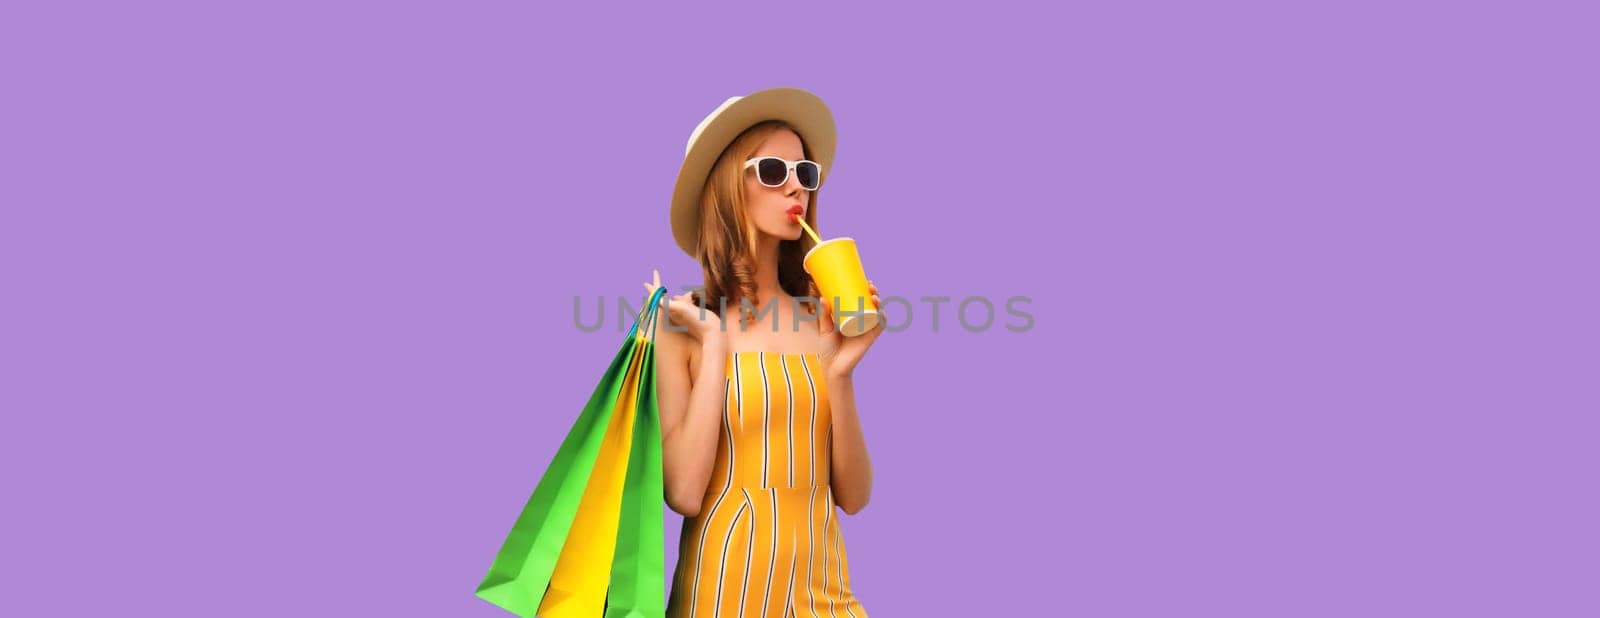 Portrait of stylish beautiful young woman posing with shopping bags drinking coffee or juice in summer hat on purple studio background